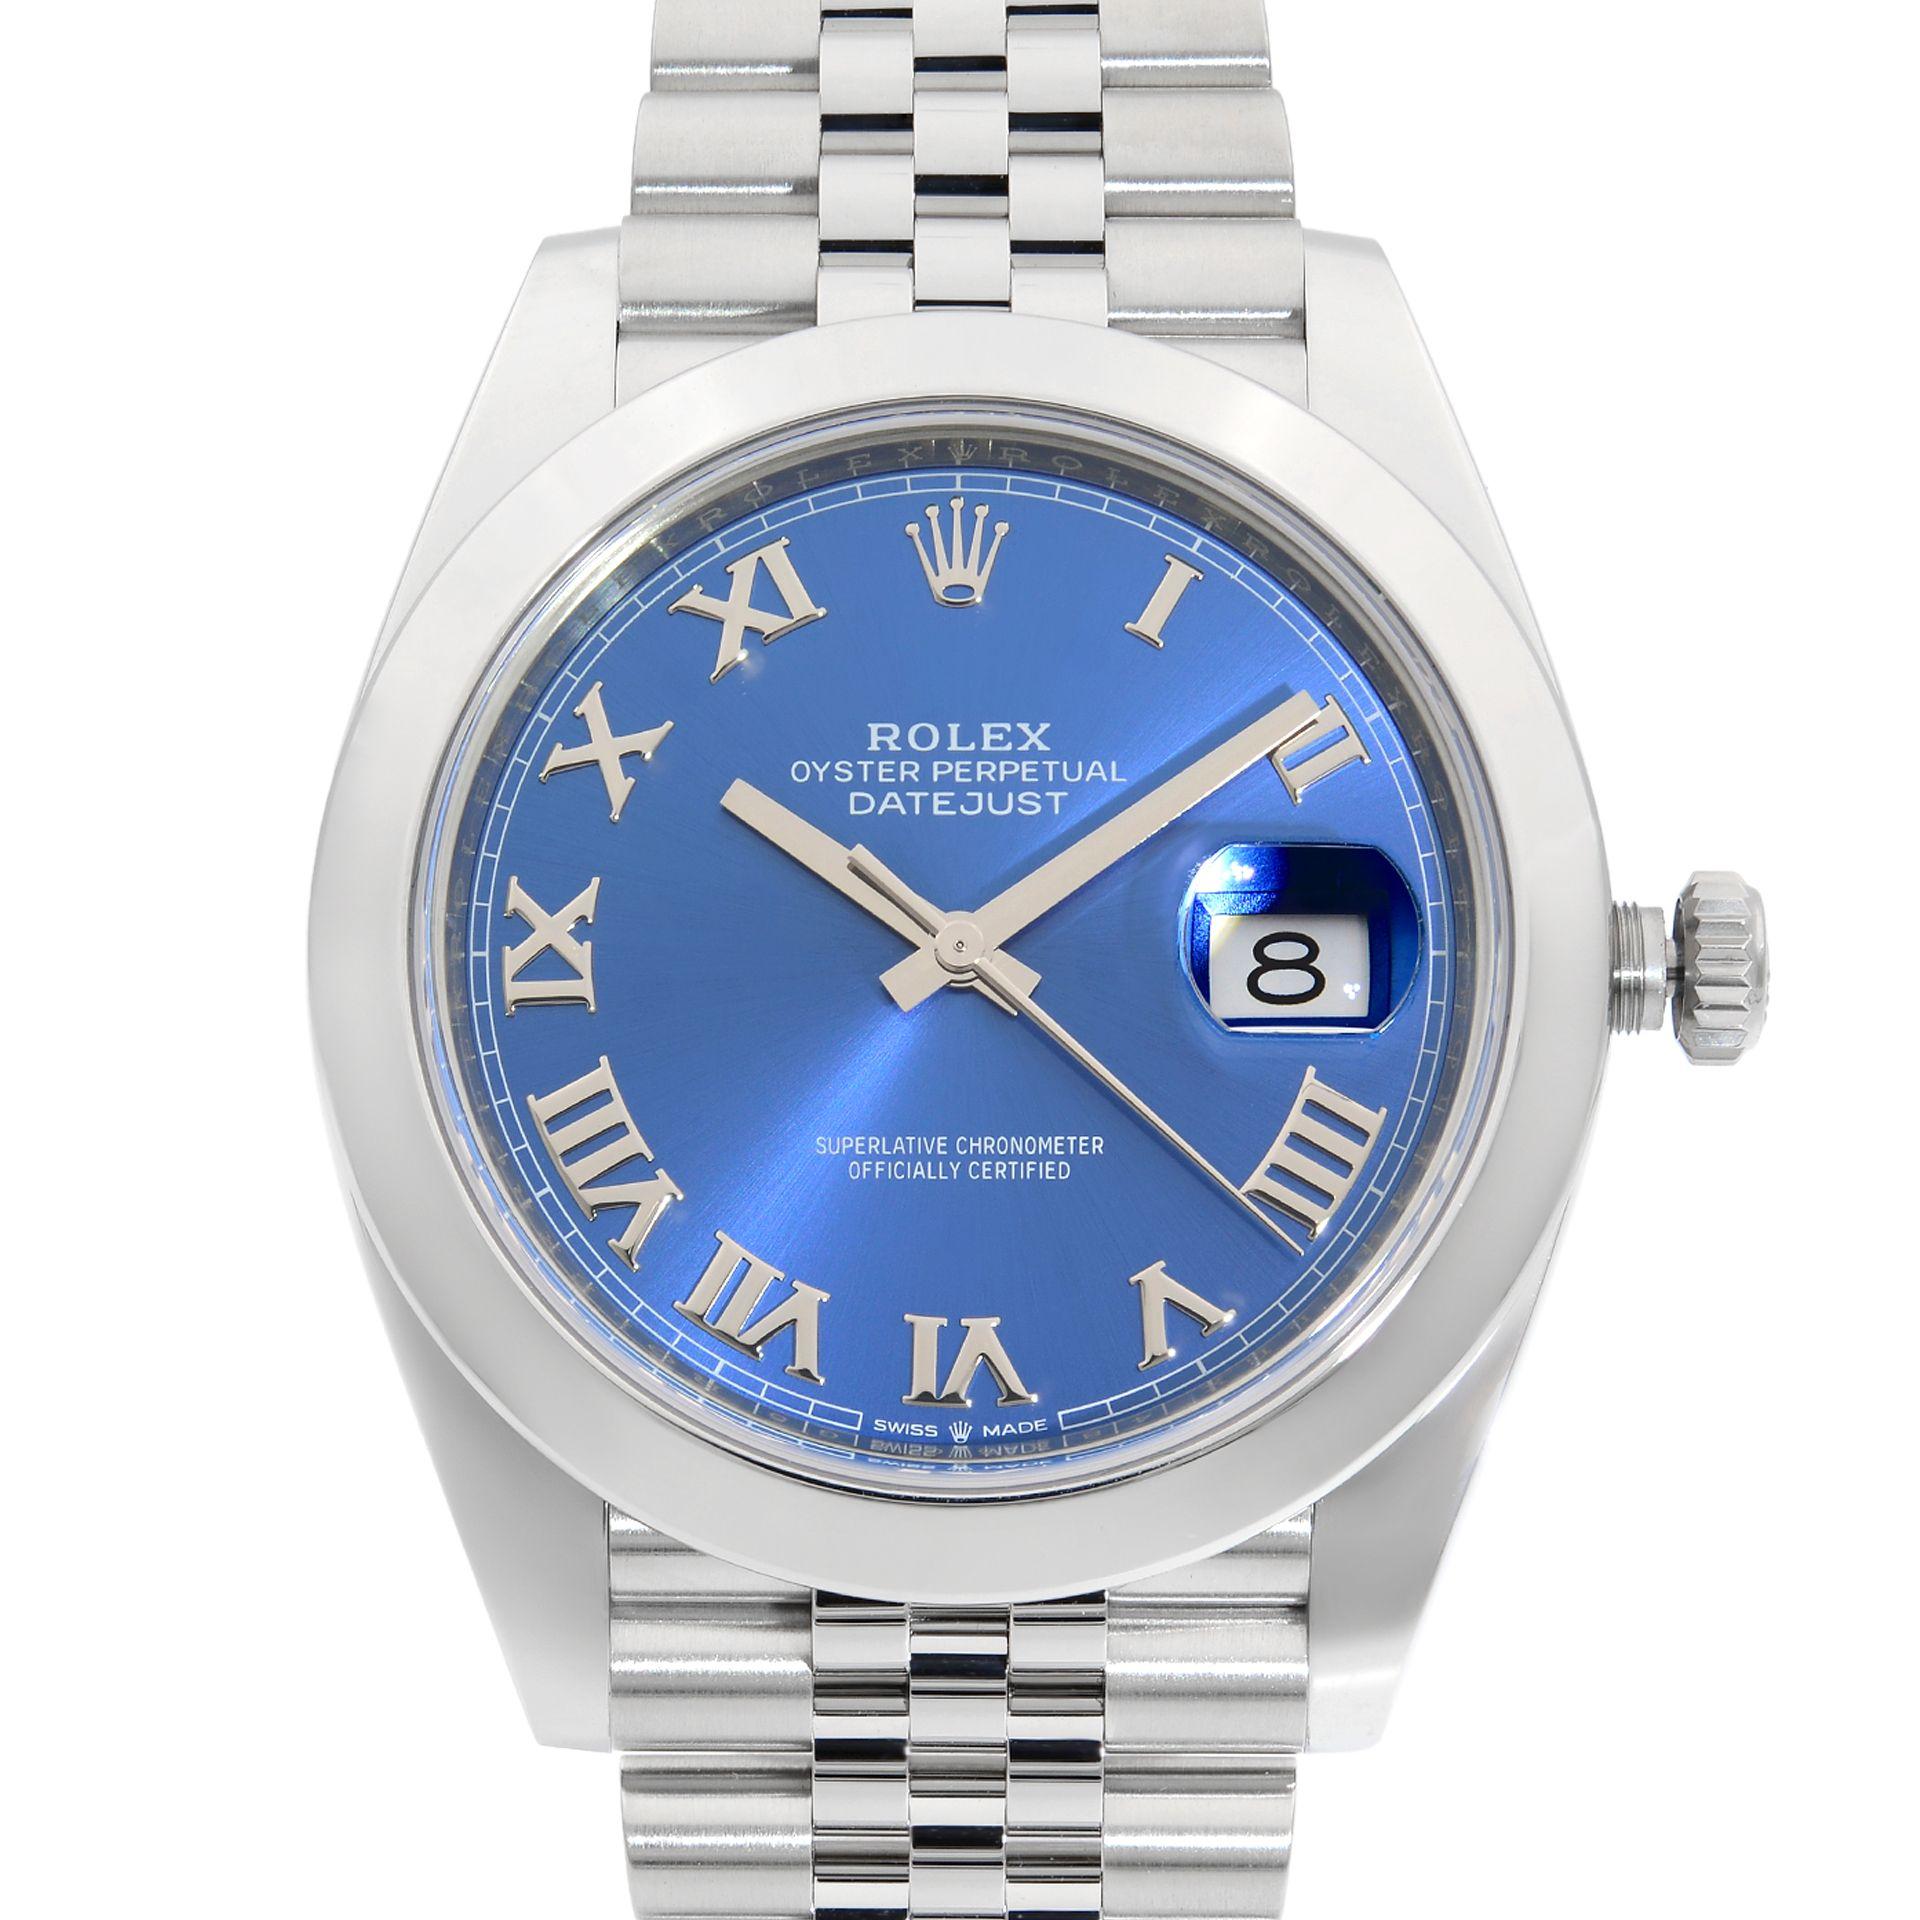 This brand new Rolex Datejust 41 126300  is a beautiful men's timepiece that is powered by a mechanical (automatic) movement which is cased in a stainless steel case. It has a round shape face, date indicator dial, and has hand roman numerals style